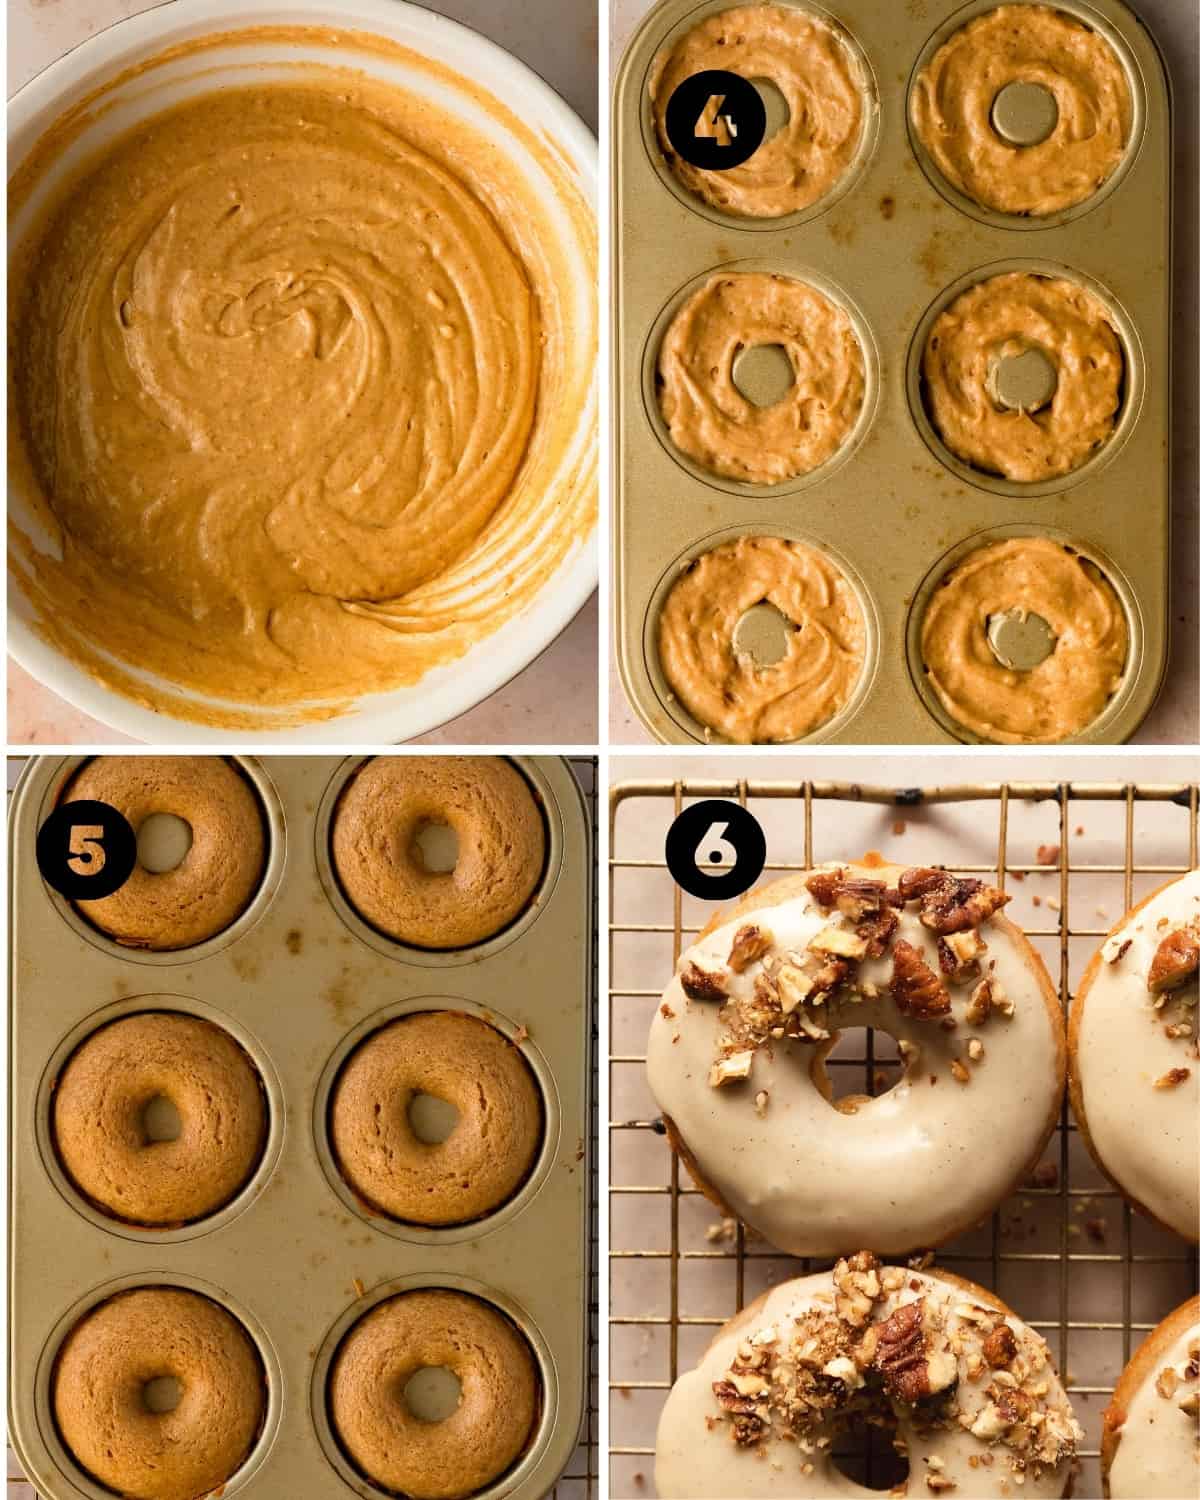 Pour the maple donut batter into the donut pan. Bake for about 8 minutes, cool and glaze. 